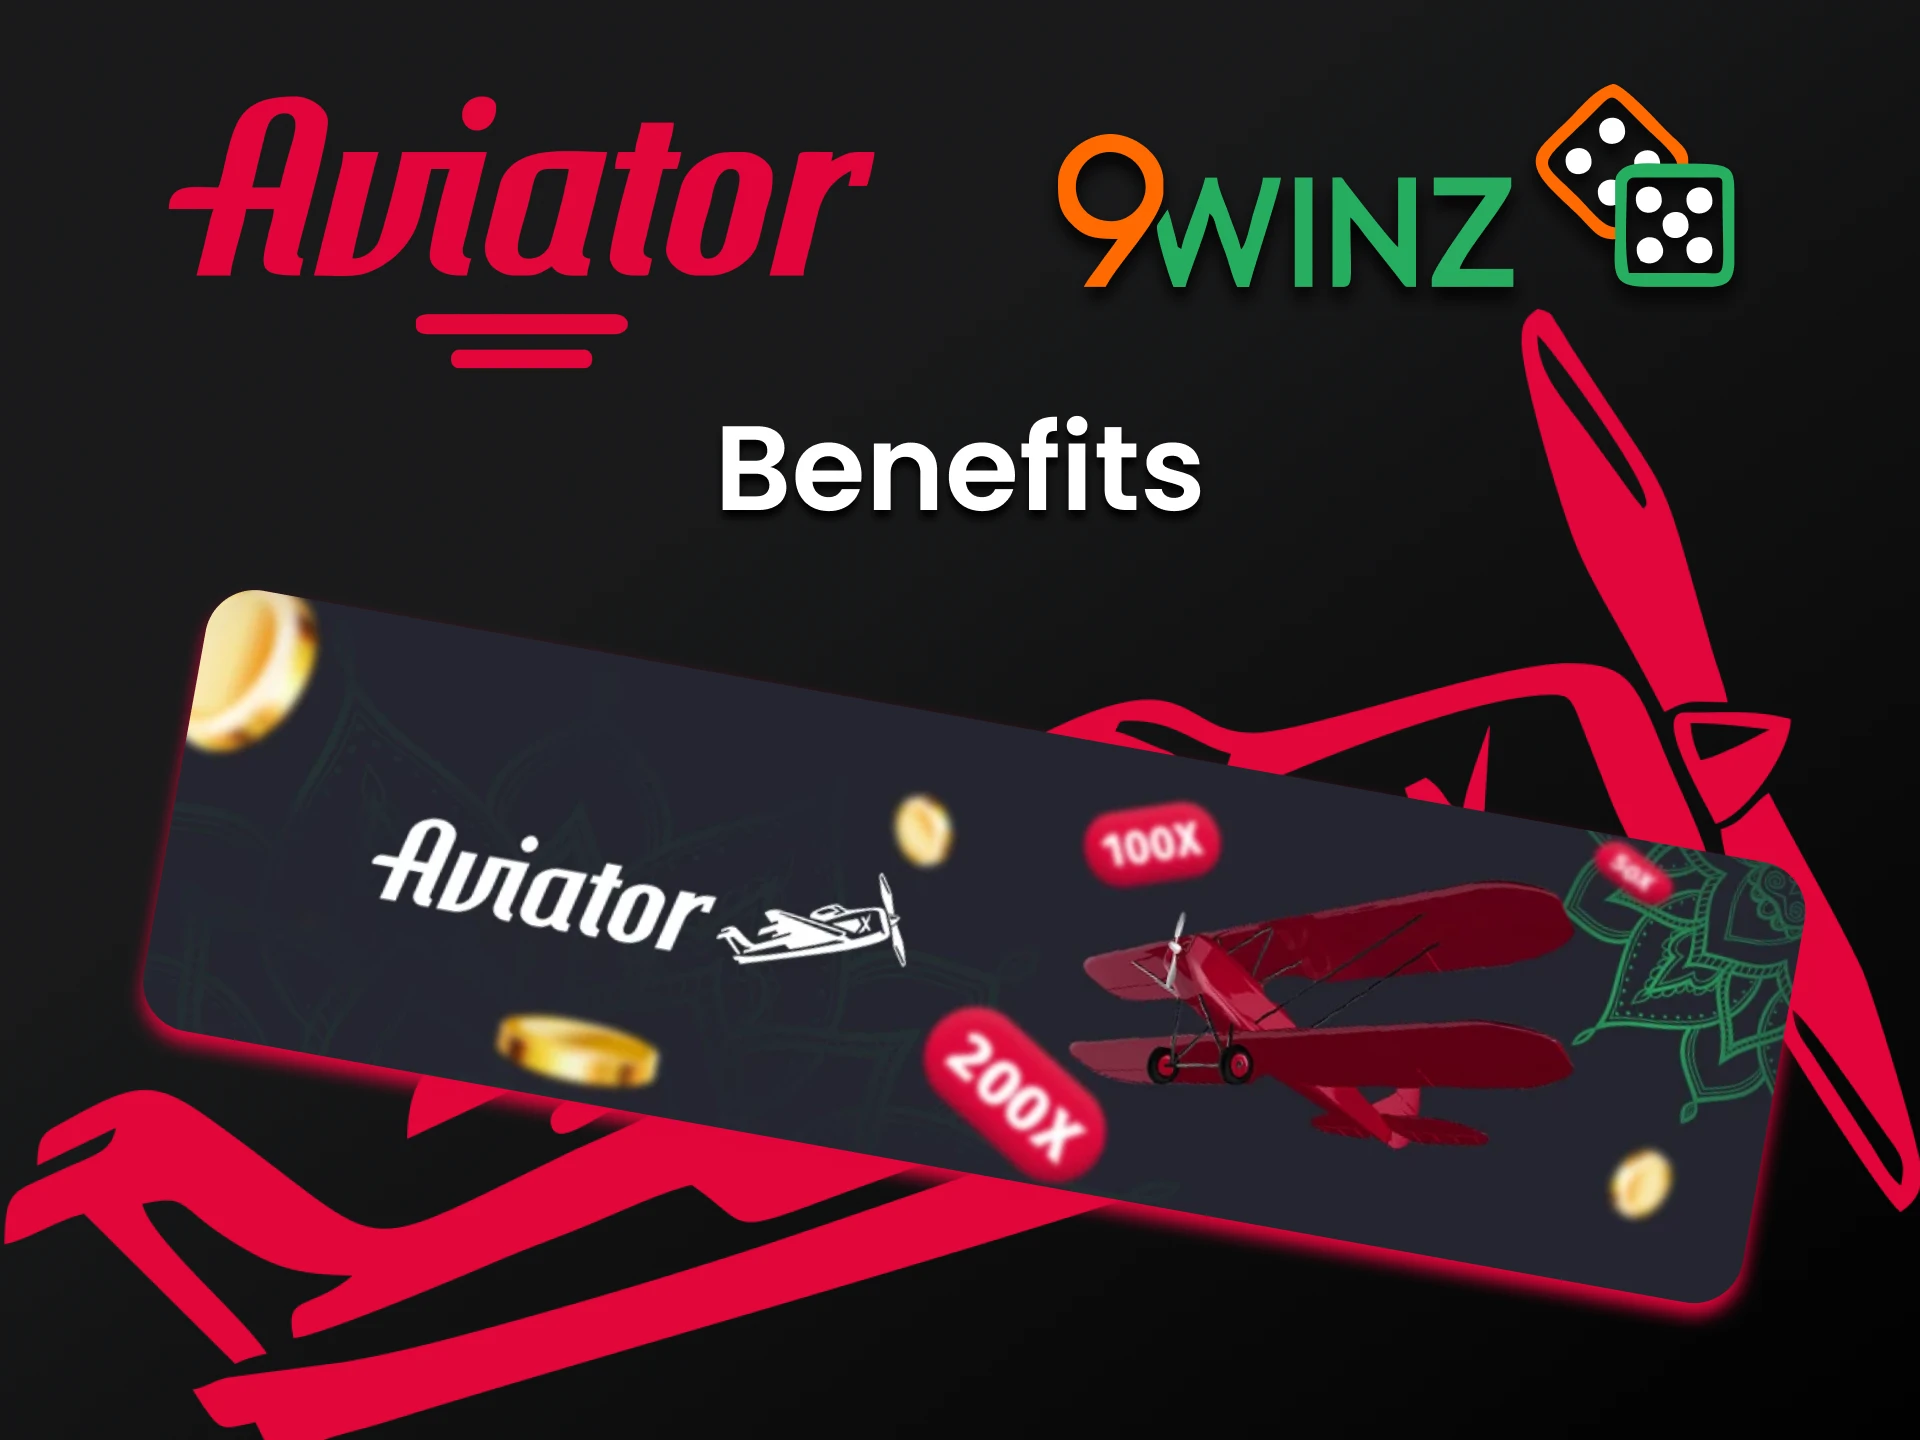 Get many benefits by choosing 9winz to play Aviator.